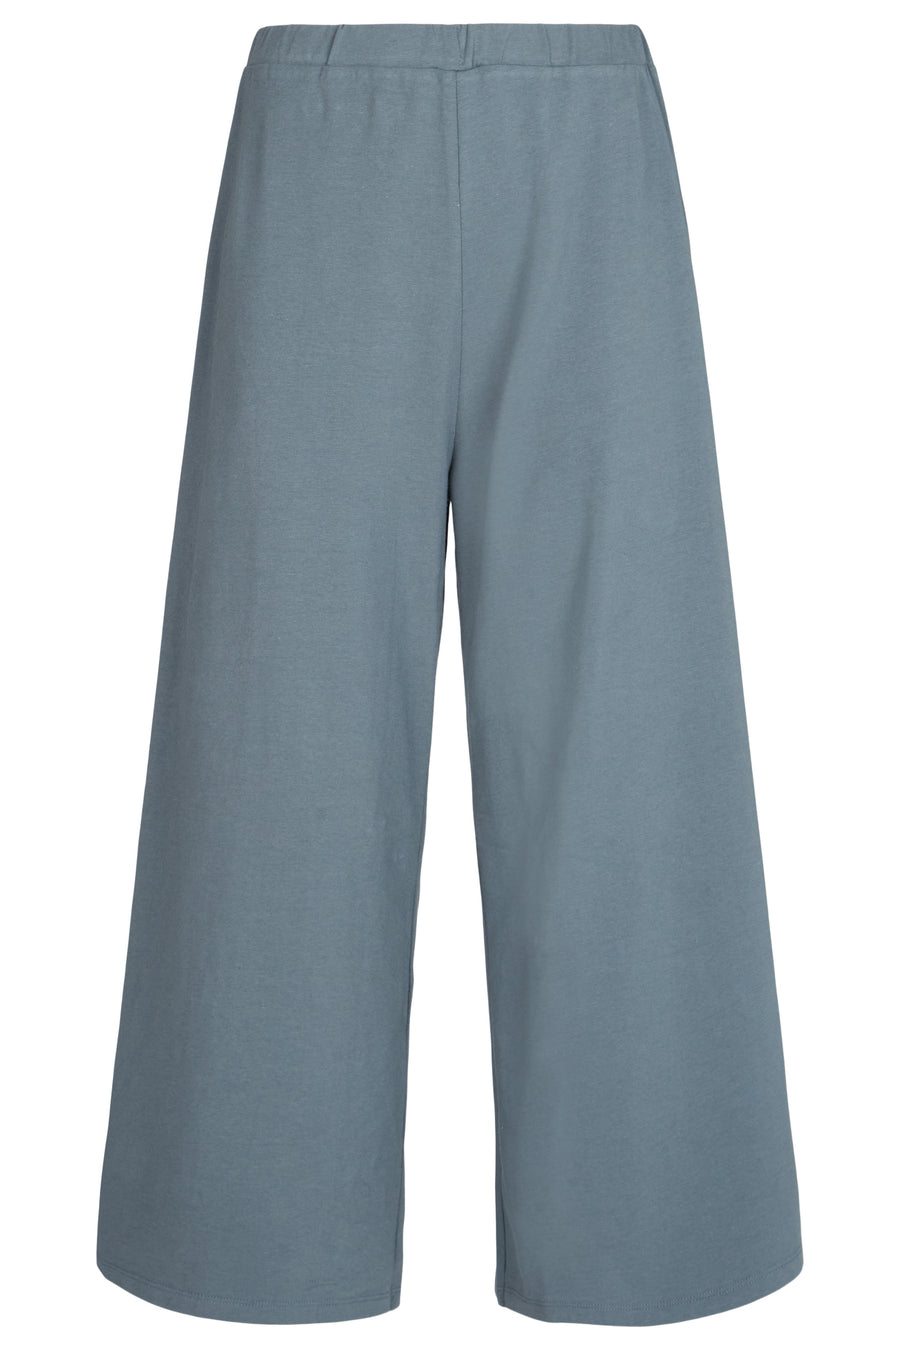 People Tree Fair Trade, Ethical & Sustainable Chandre Trousers in Dark grey 95% organic certified cotton, 5% elastane